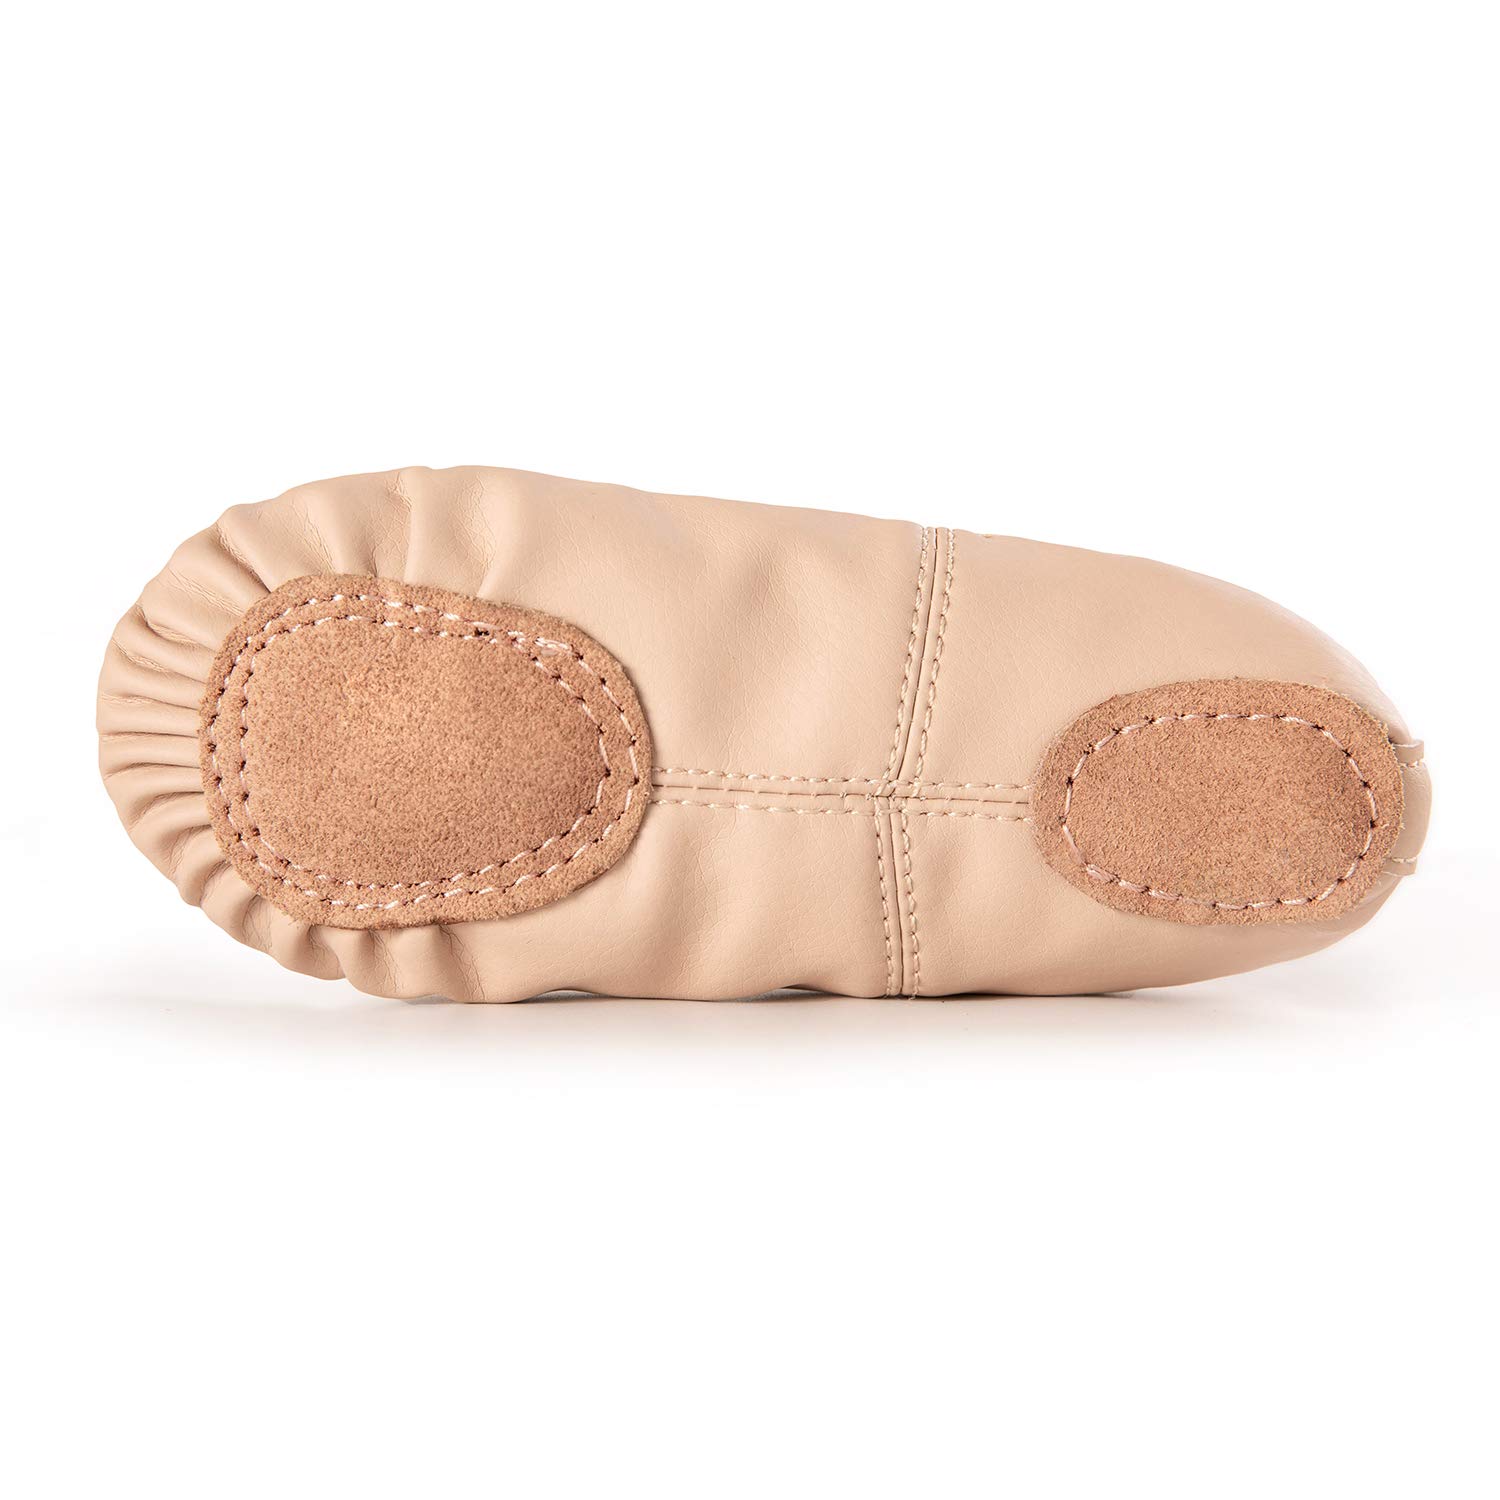 RoseMoli Ballet Shoes for Girls/Toddlers/Kids/Women, Leather Yoga Shoes/Ballet Slippers for Dancing